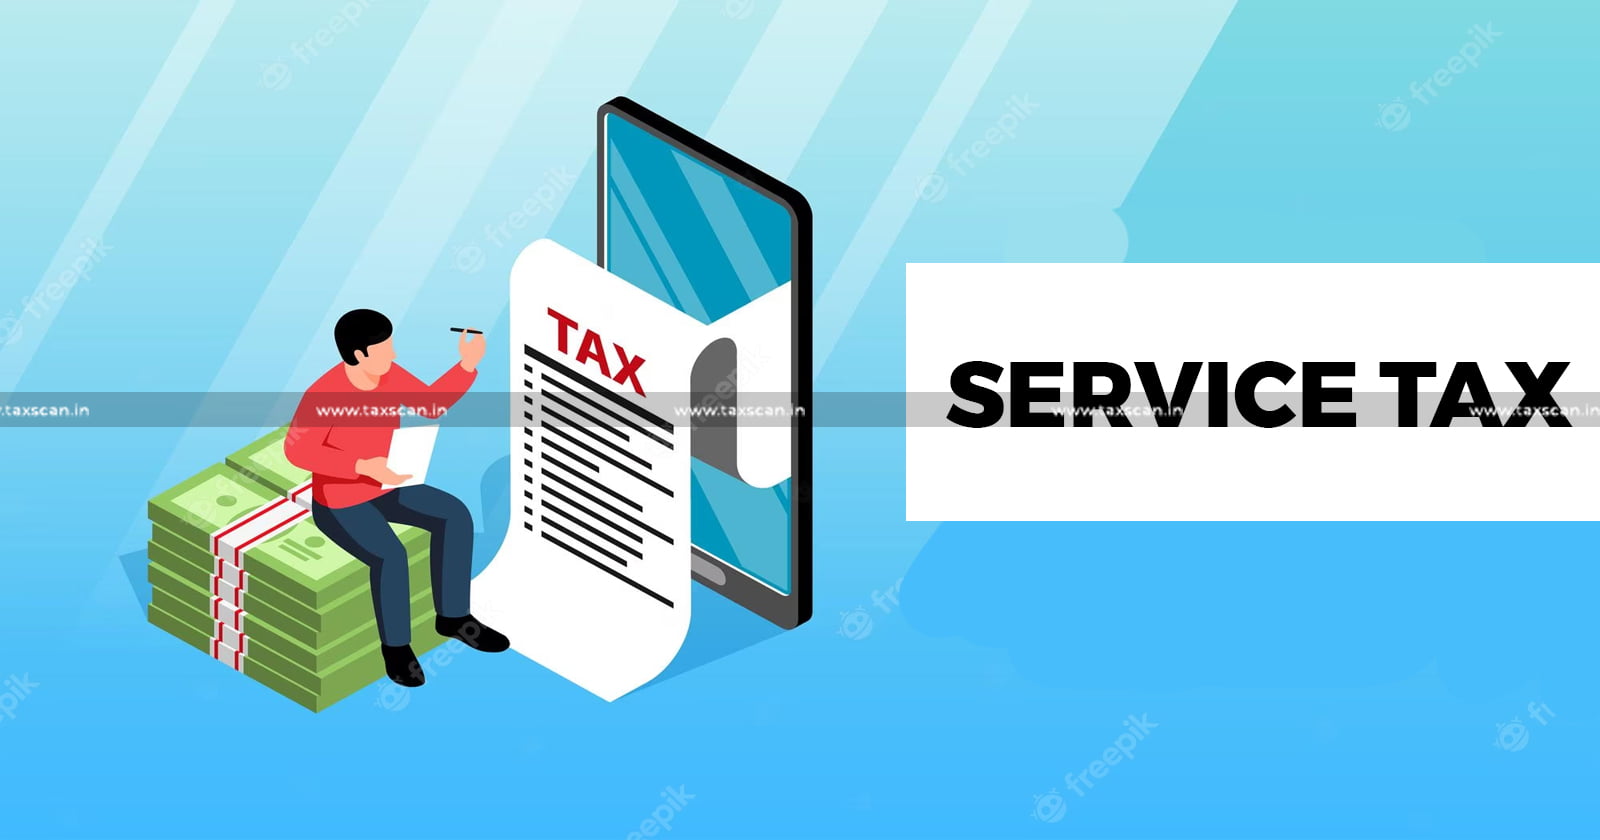 Service Recipient - Pay Service Tax - PE of Foreign Service Provider Exists in India - CESTAT - TAXSCAN